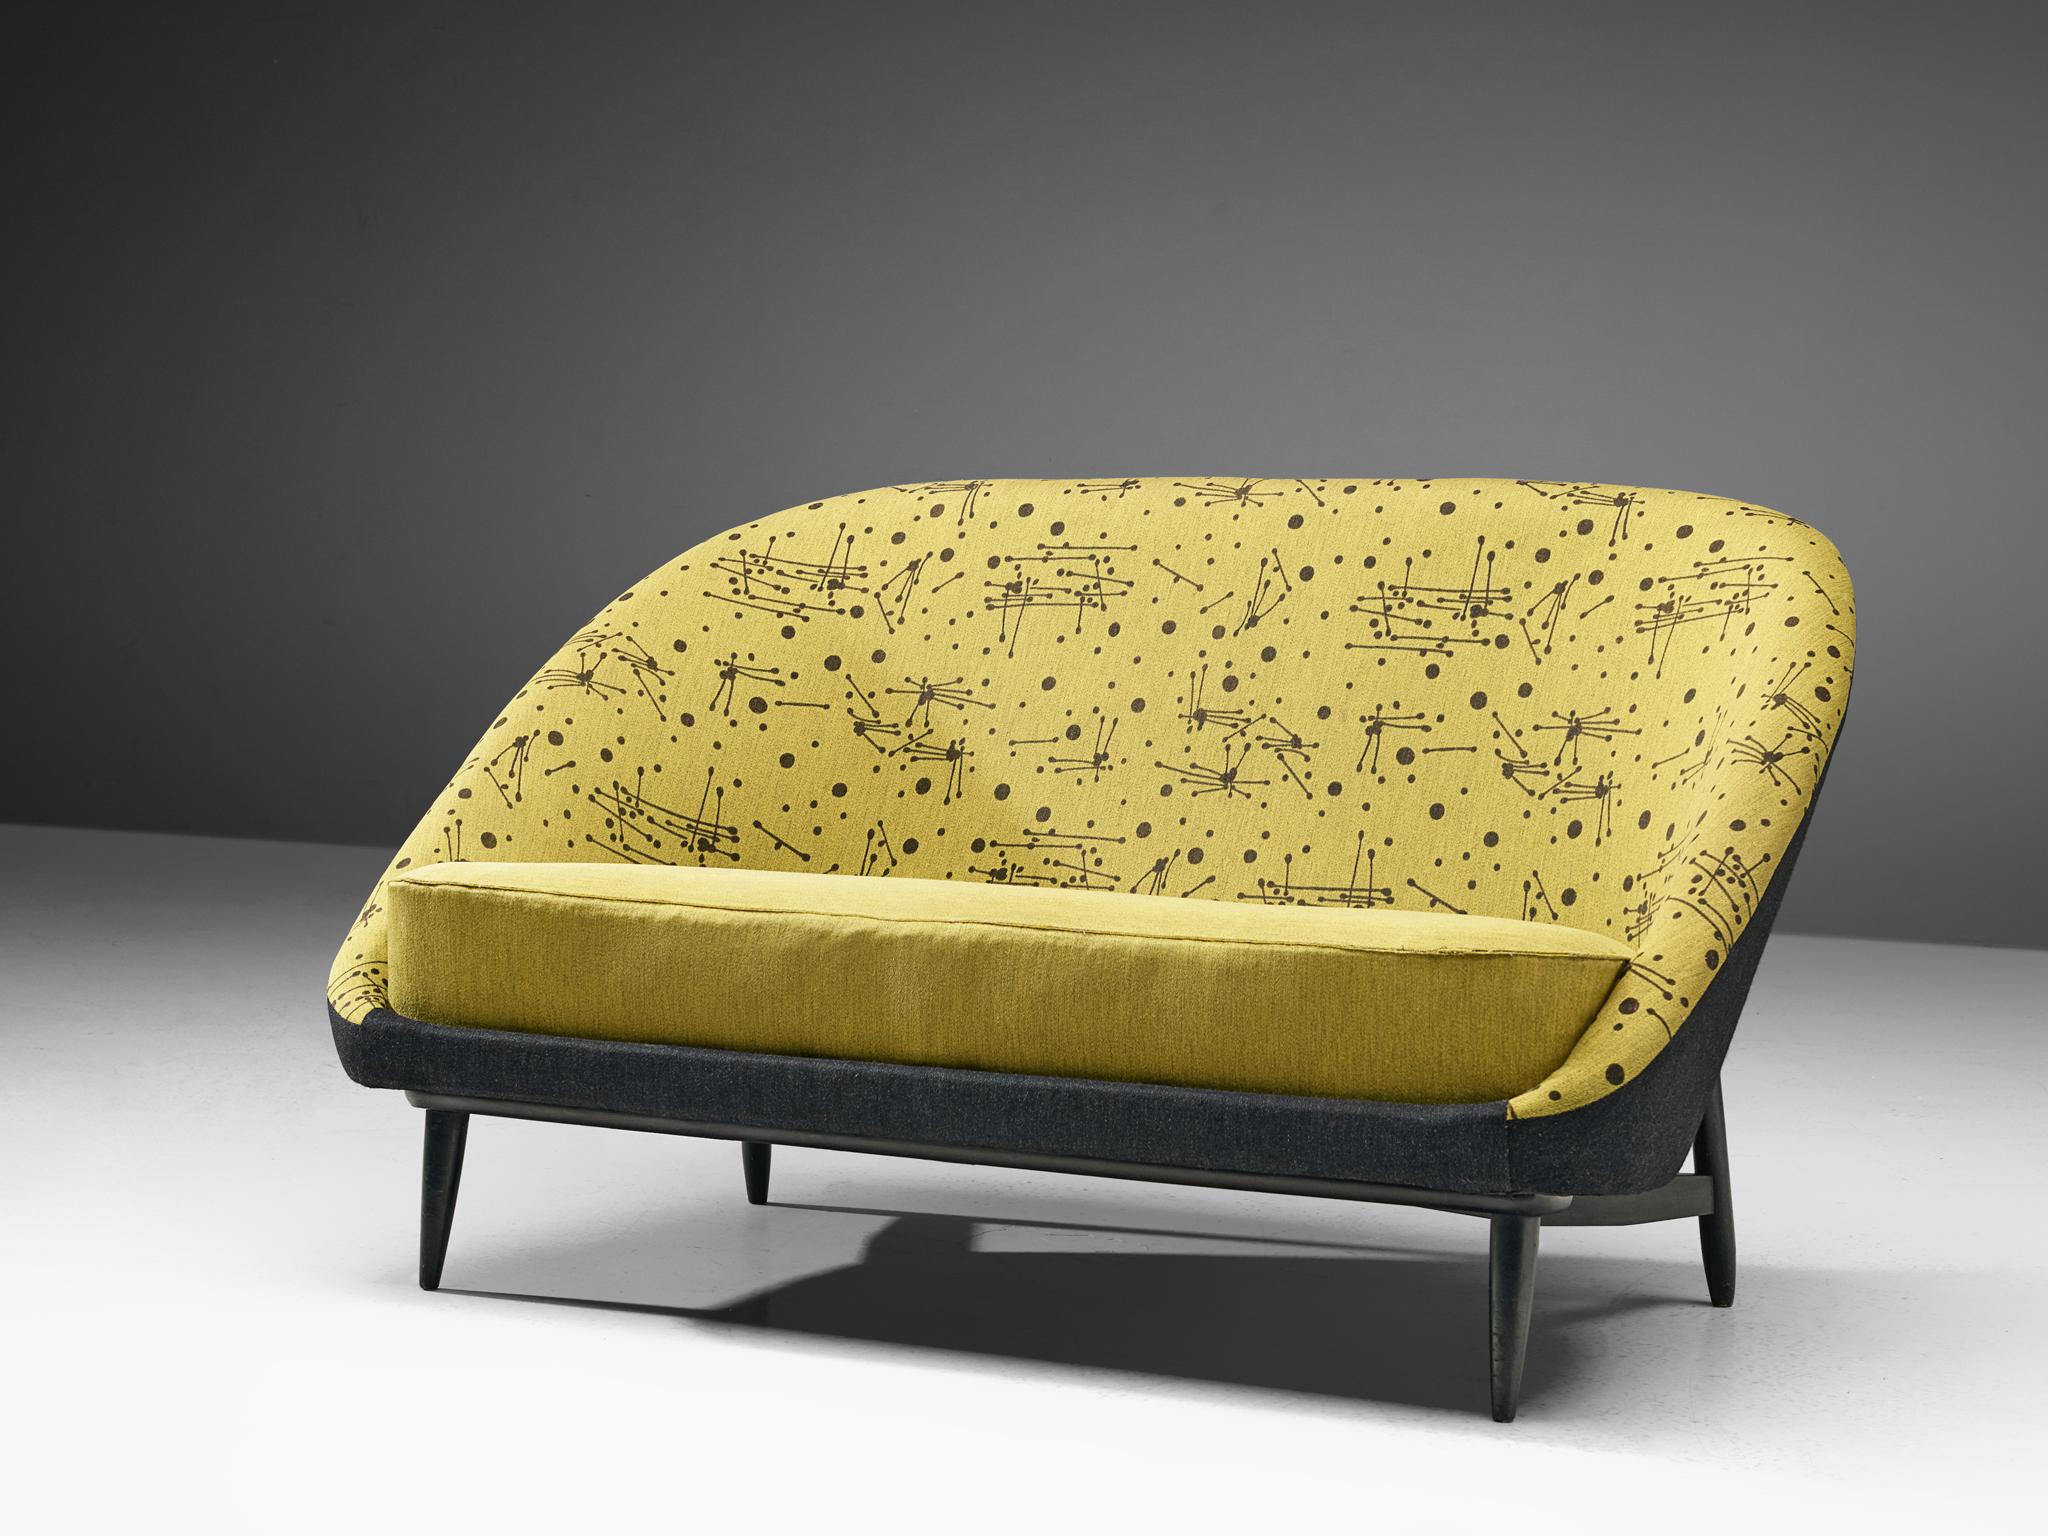 Theo Ruth for Artifort, sofa, fabric, wood, Netherlands 1970. 

A Dutch settee in a two-toned, printed fabric by Theo Ruth. The back tilts slightly backward and has the recognizable natural flow and feel of Ruth's design. The frame of the sofa is